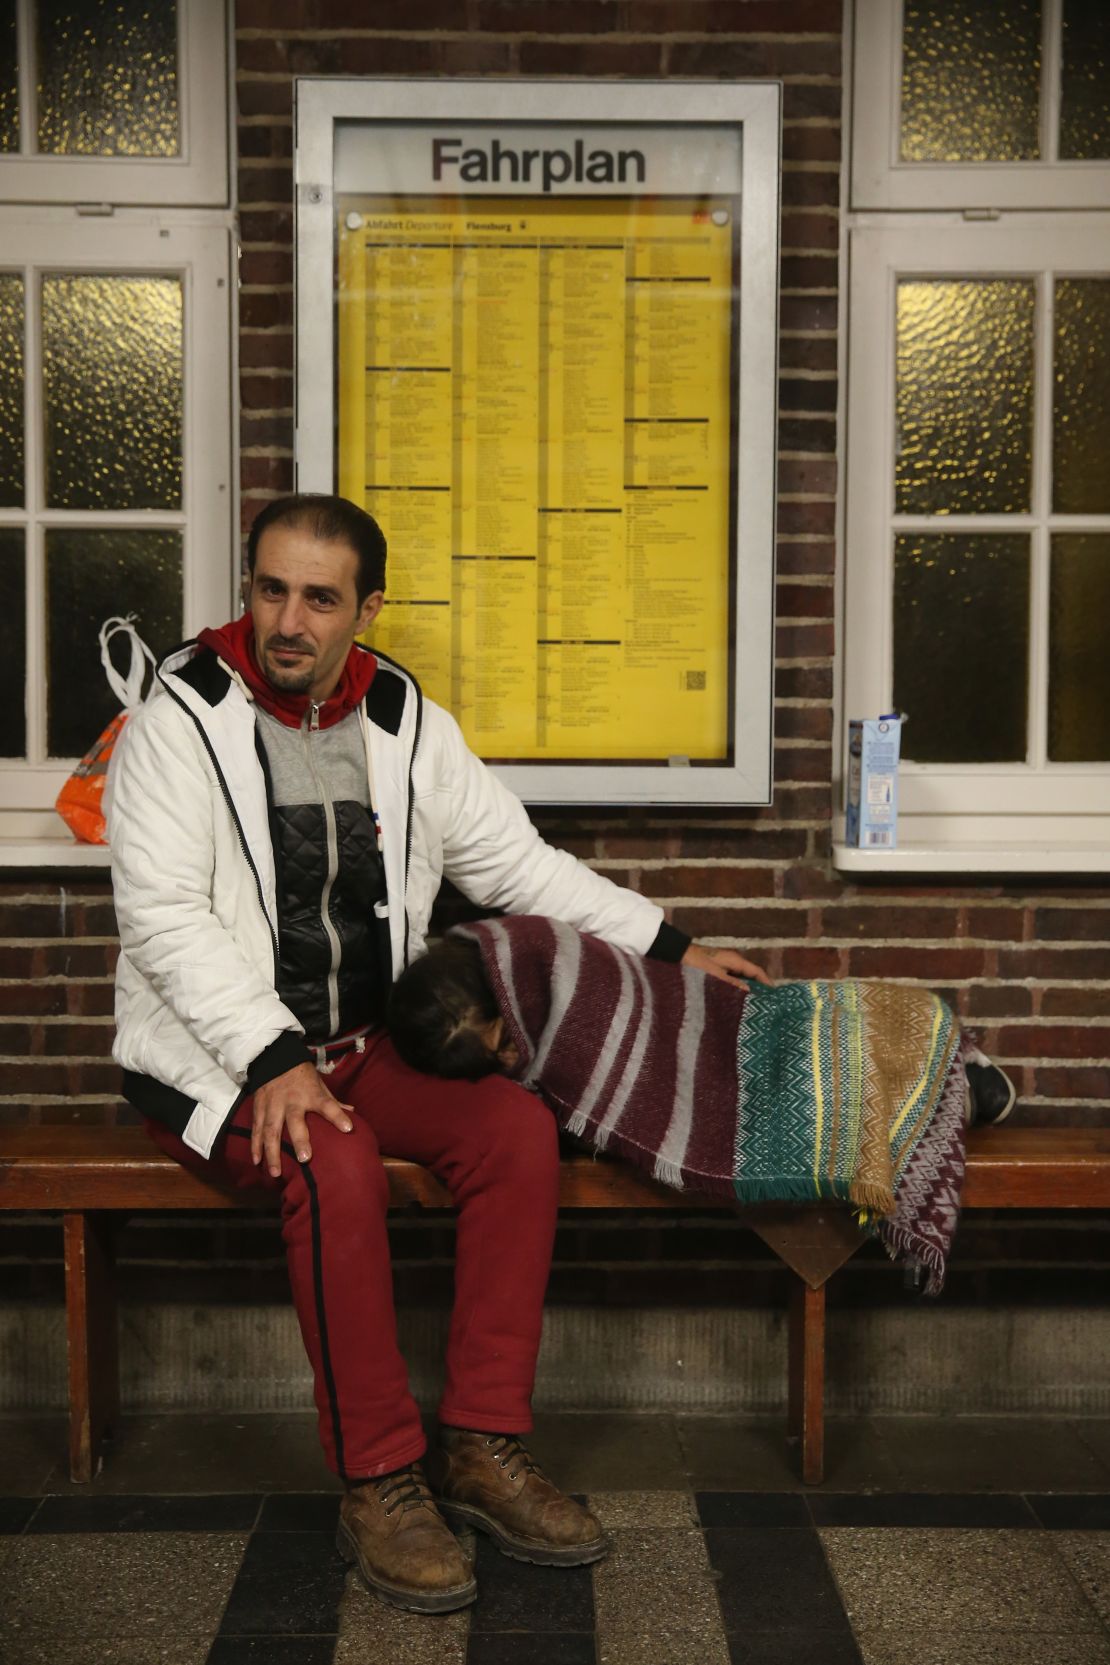 A Syrian hoping for Danish asylum lets his daughter rest in a German train station near Denmark.